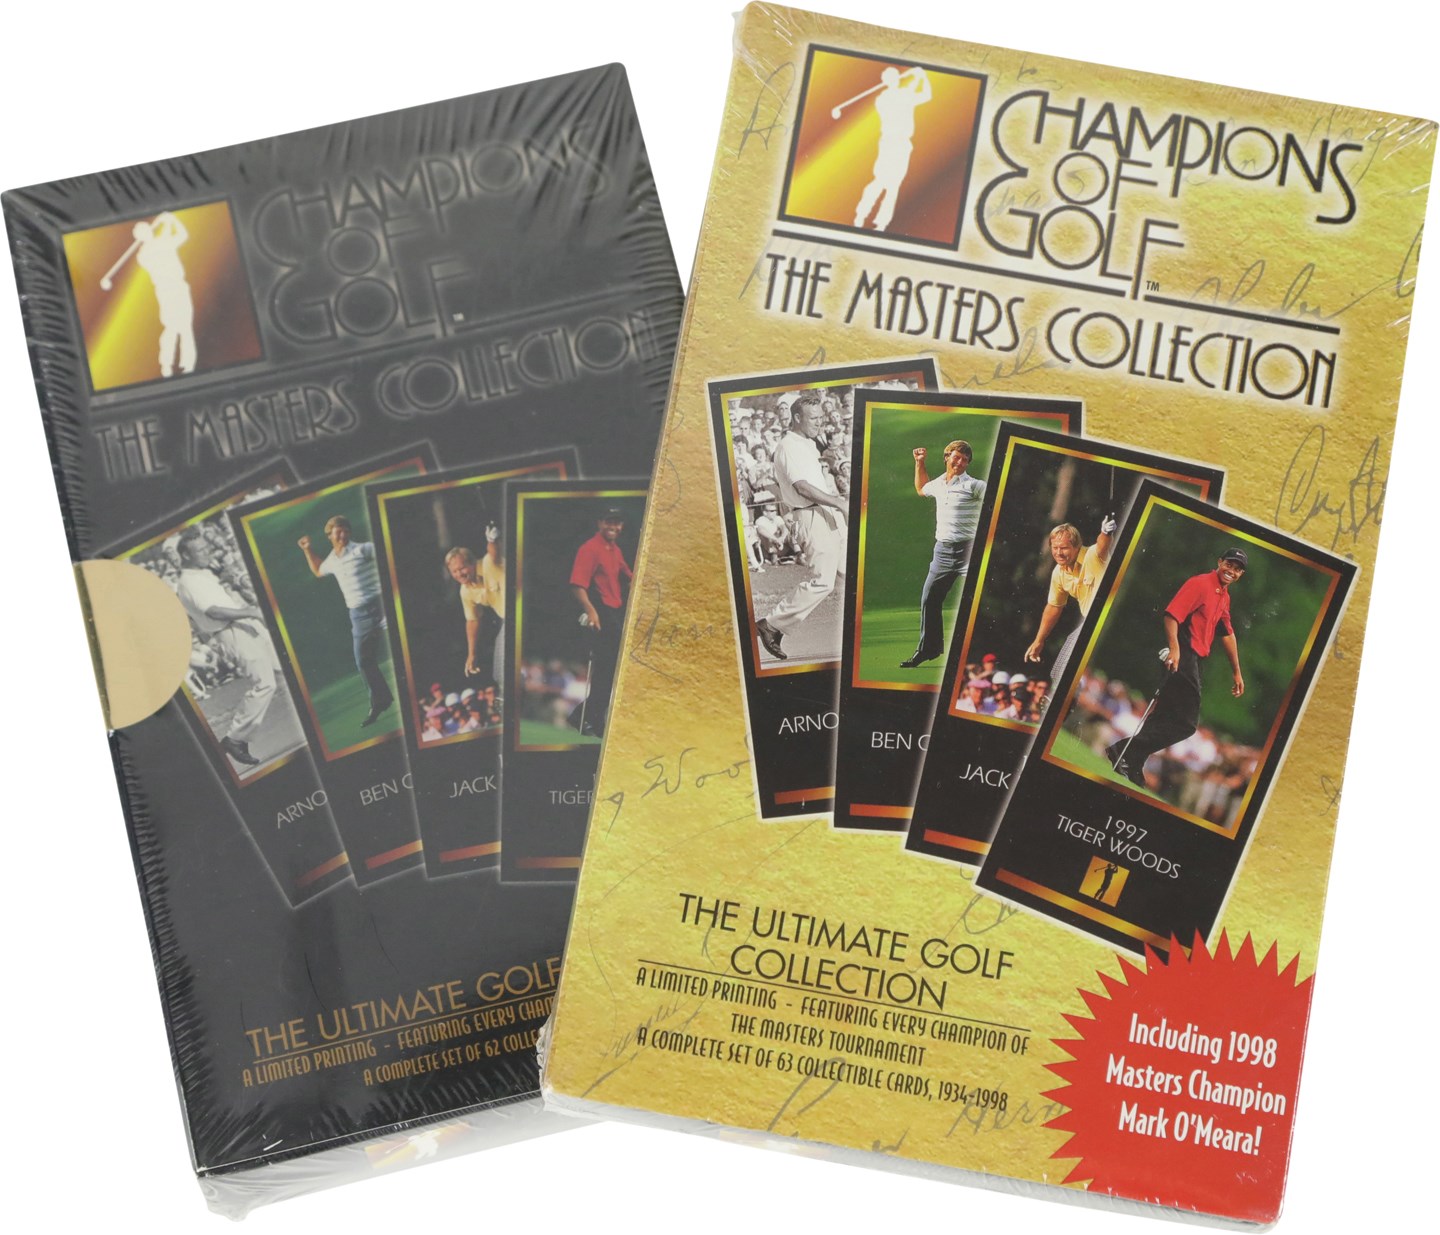 Unopened Boxes, Packs And Cases - 1997 & 1998 Champions of Golf The Master Collection Unopened Factory Set Duo